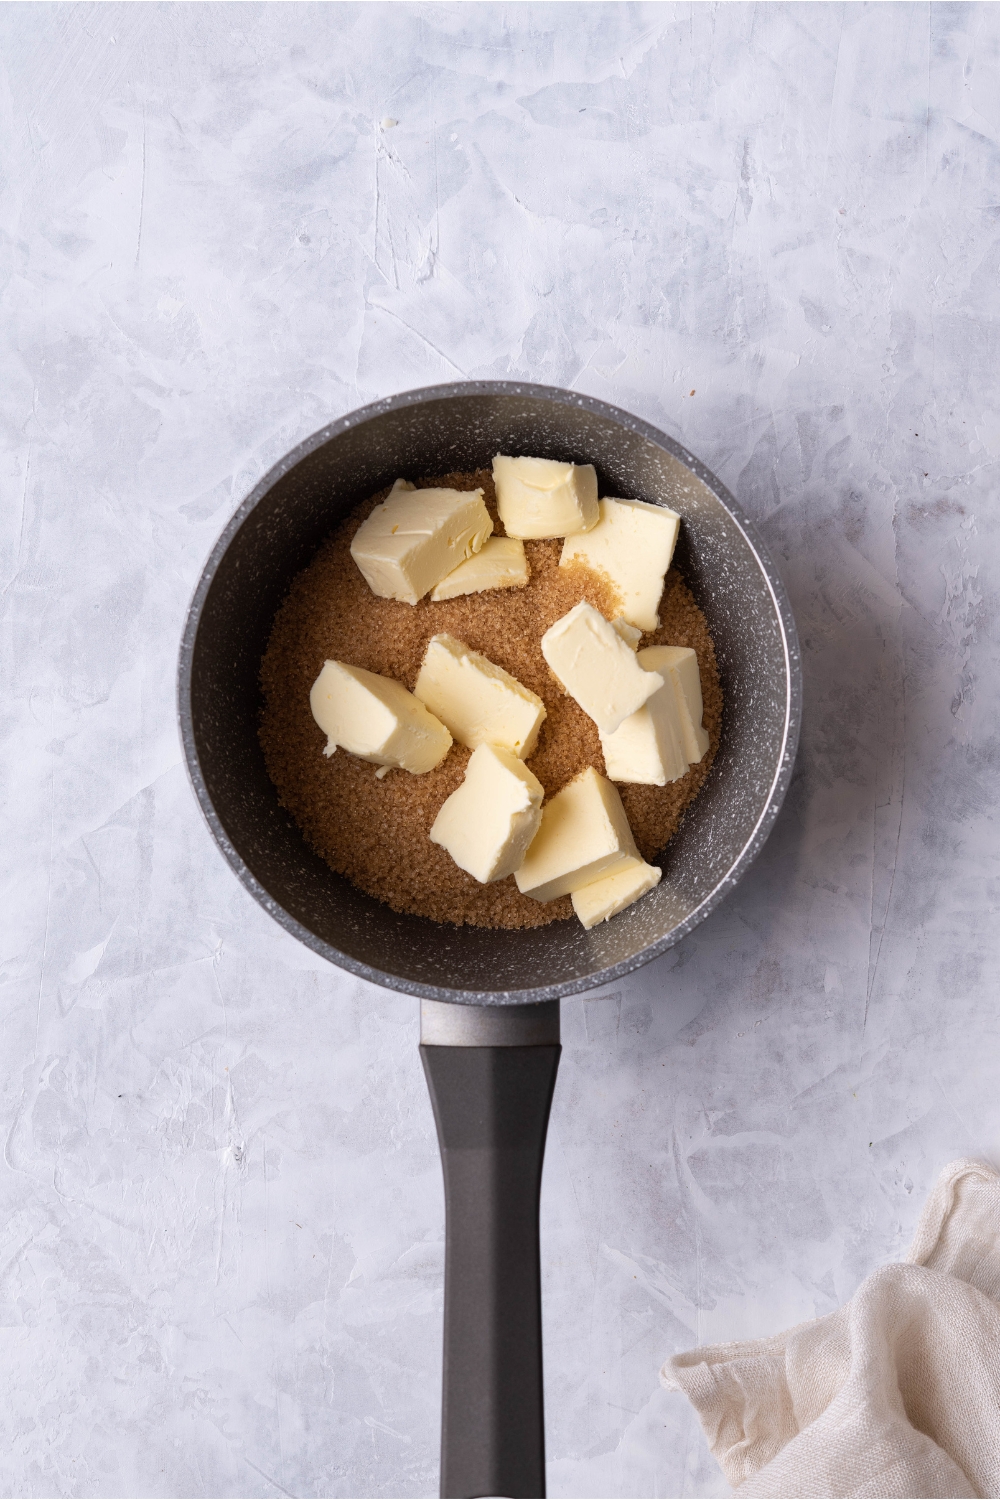 Saucepan filled with brown sugar and cubes of butter.